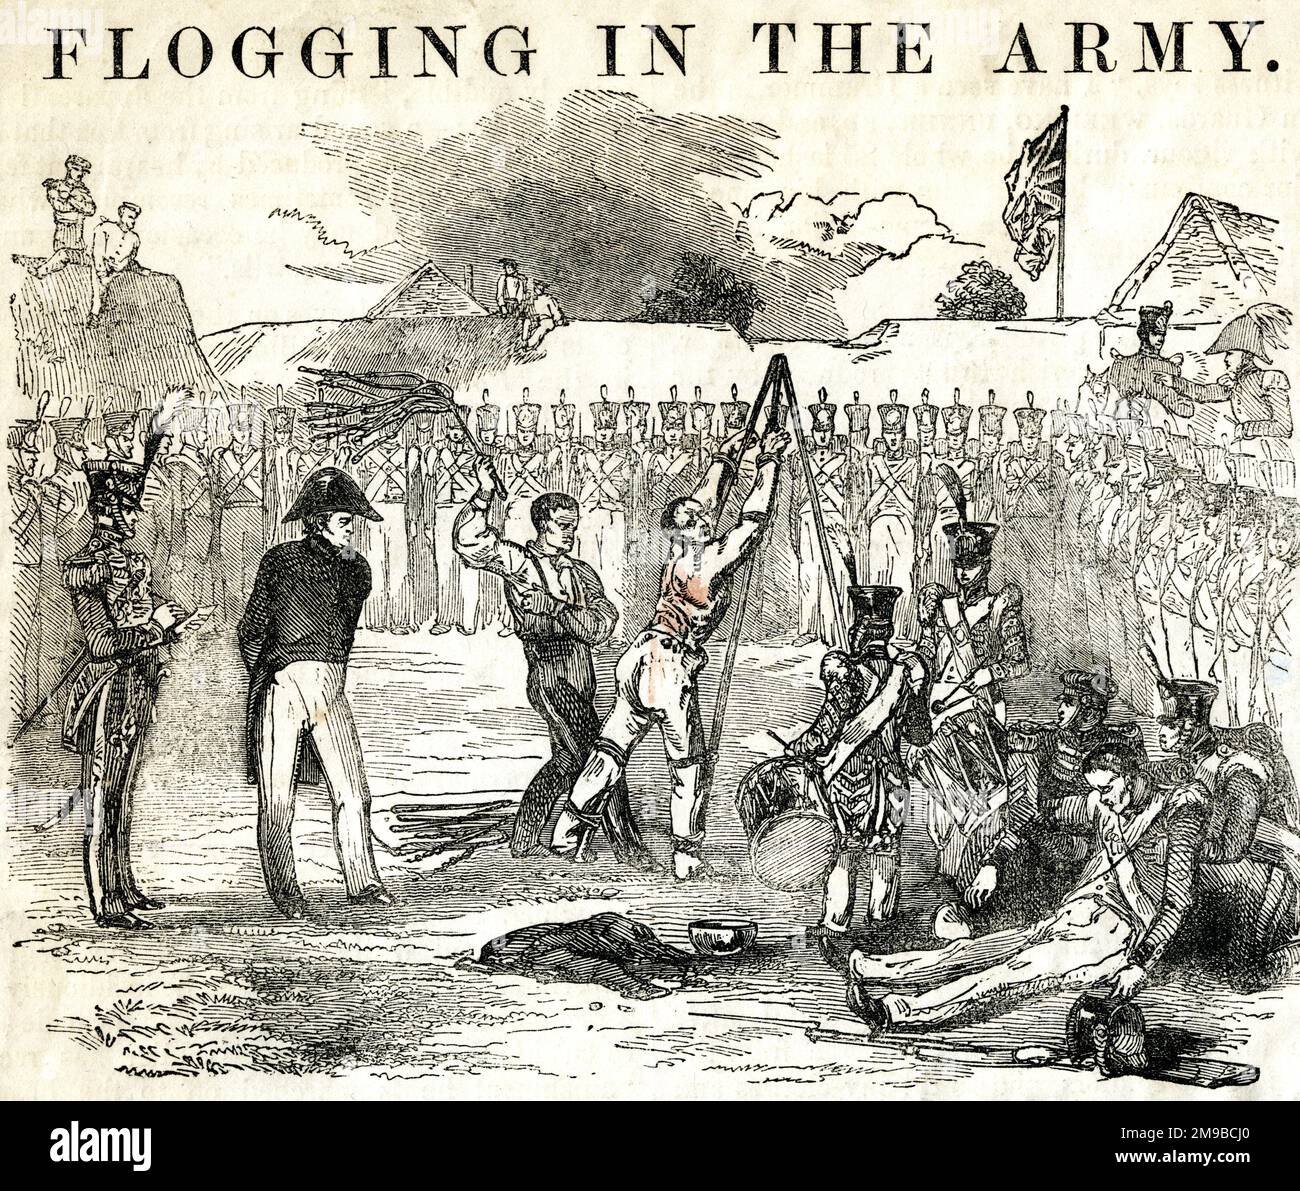 Flogging of troops by the British Army in India - scene at the Spur Battery, Chatham Lines, where the regiment and sometimes the whole garrison is drawn up in the form of a square, to witness the prisoner, stripped to the waist and pinioned to the triangle, being lashed with a cat of nine tails by several drummers in succession. The drum major on the left has the job of counting the number of lashes. A soldier on the right has fainted at the sight. Stock Photo